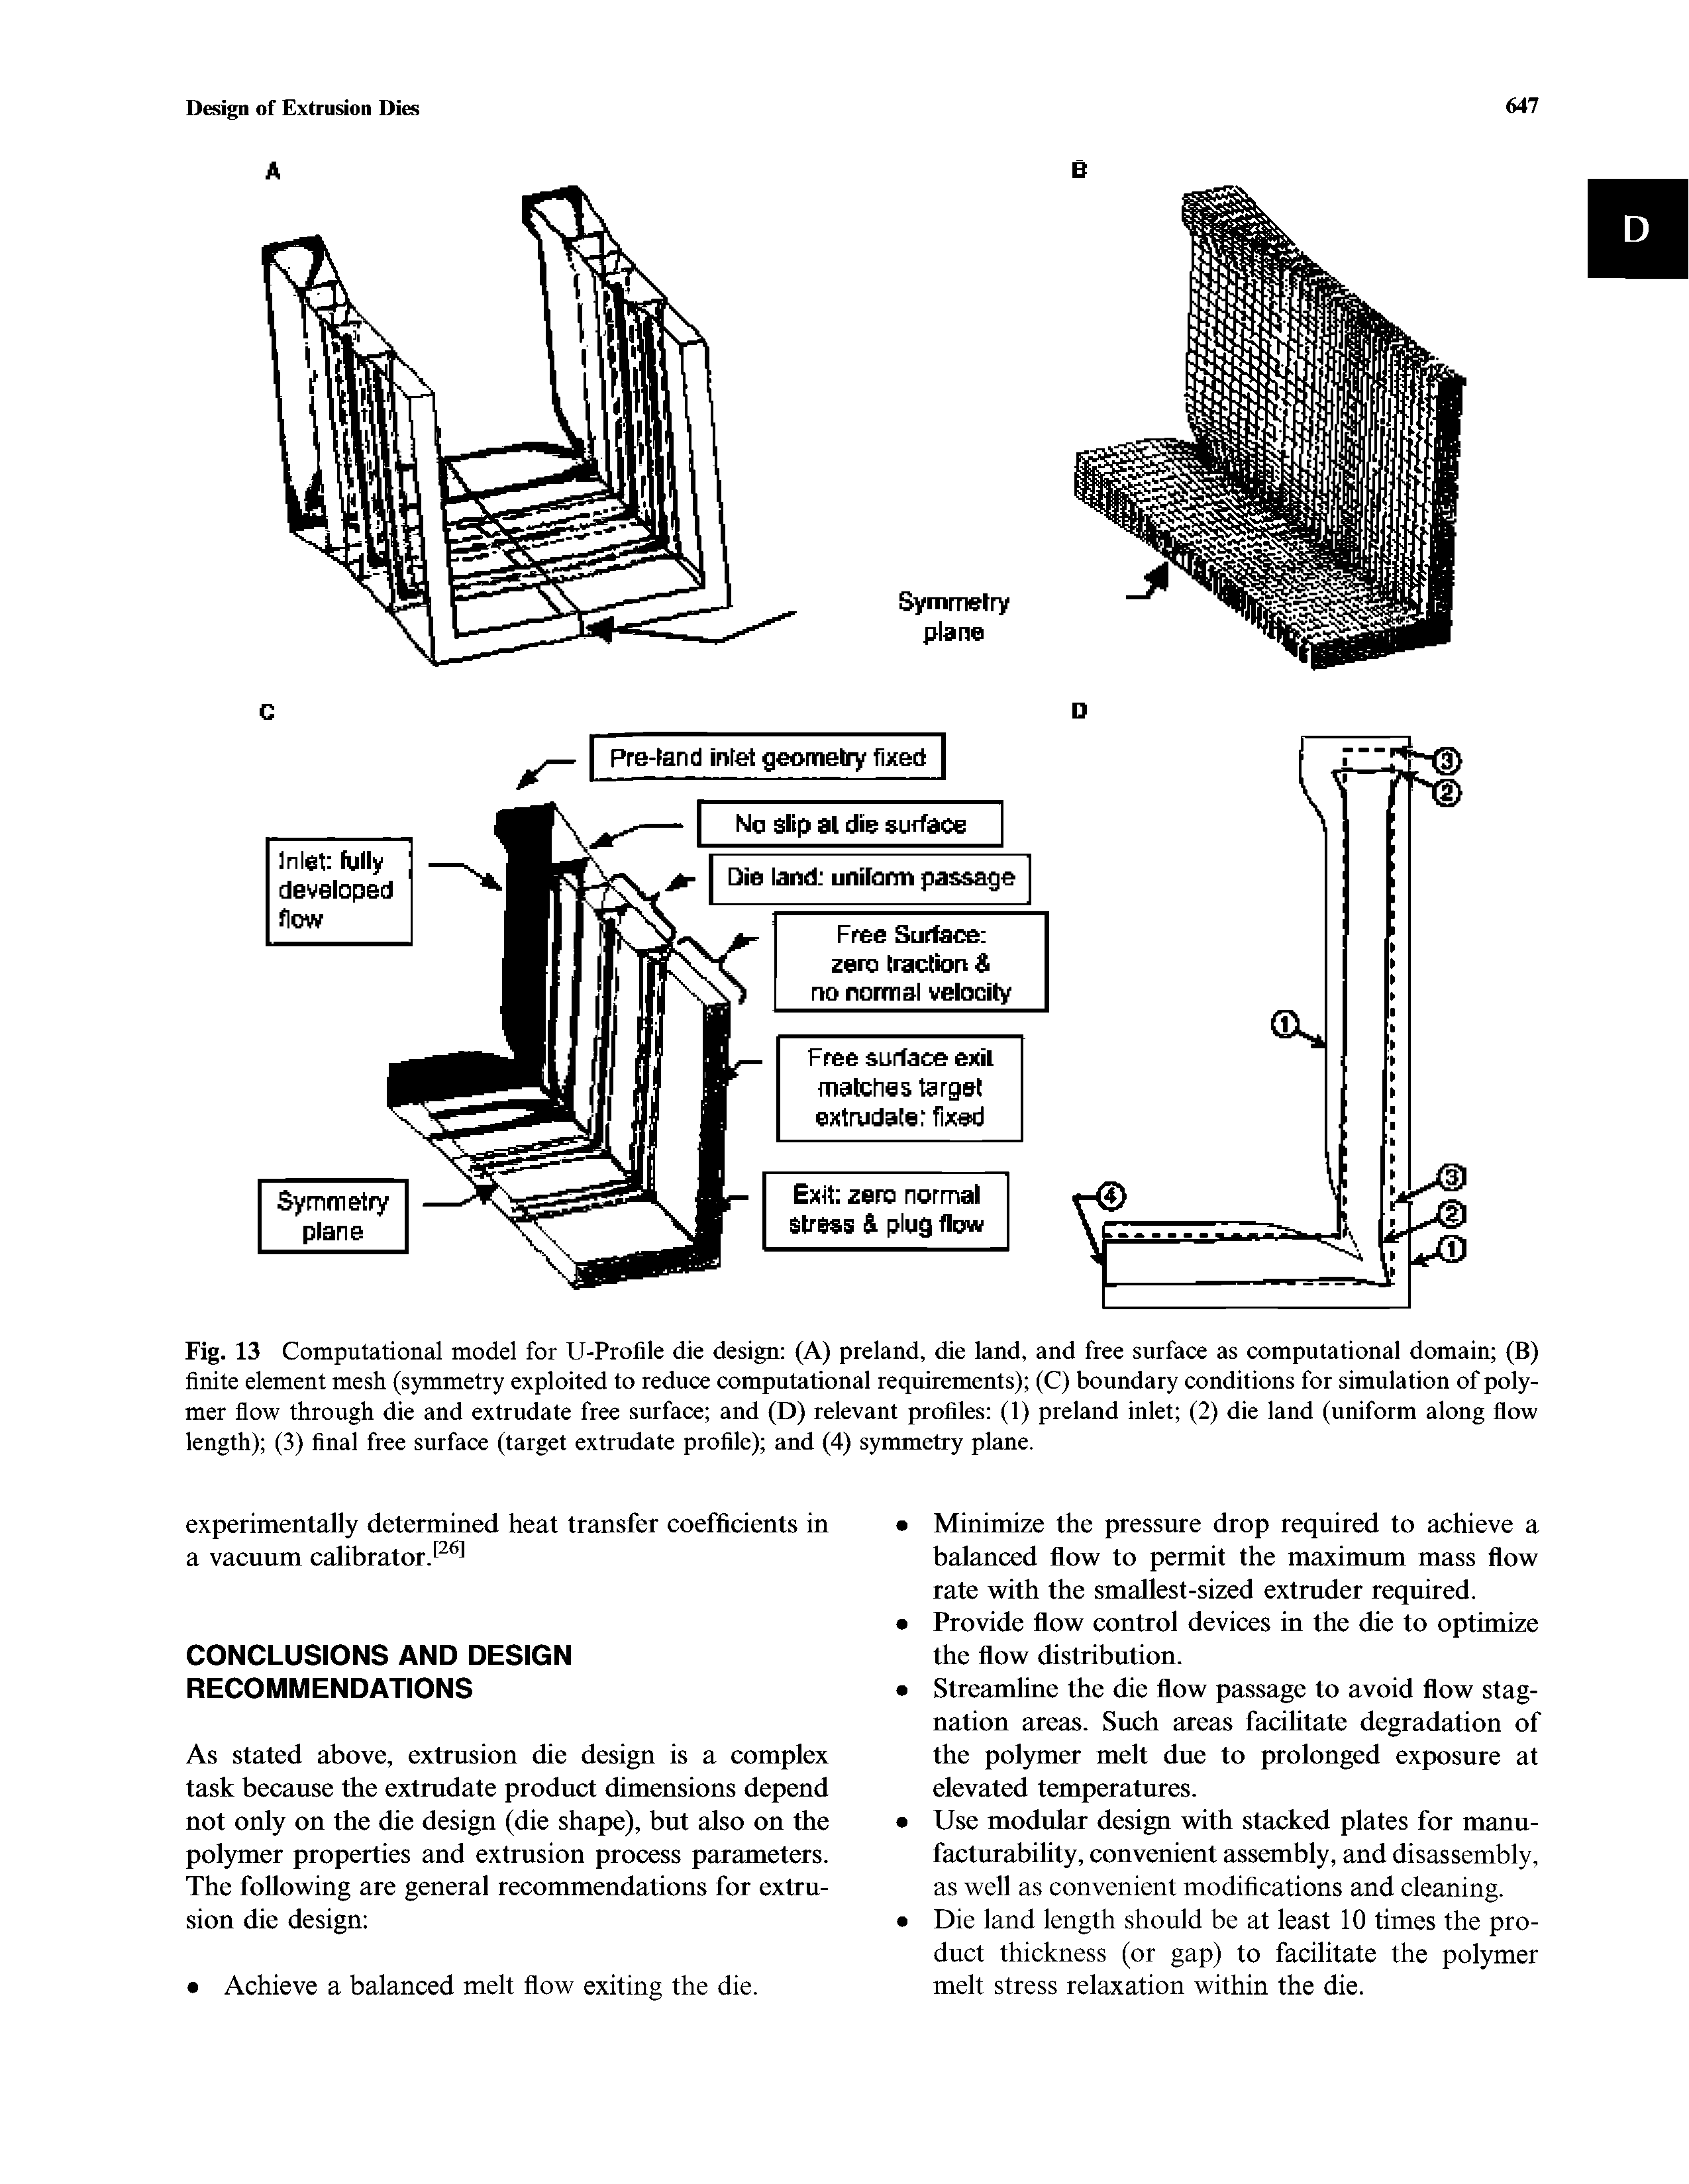 Fig. 13 Computational model for U-Profile die design (A) preland, die land, and free surface as computational domain (B) finite element mesh (symmetry exploited to reduce computational requirements) (C) boundary conditions for simulation of polymer fiow through die and extrudate free surface and (D) relevant profiles (1) preland inlet (2) die land (uniform along flow length) (3) final free surface (target extrudate profile) and (4) symmetry plane.